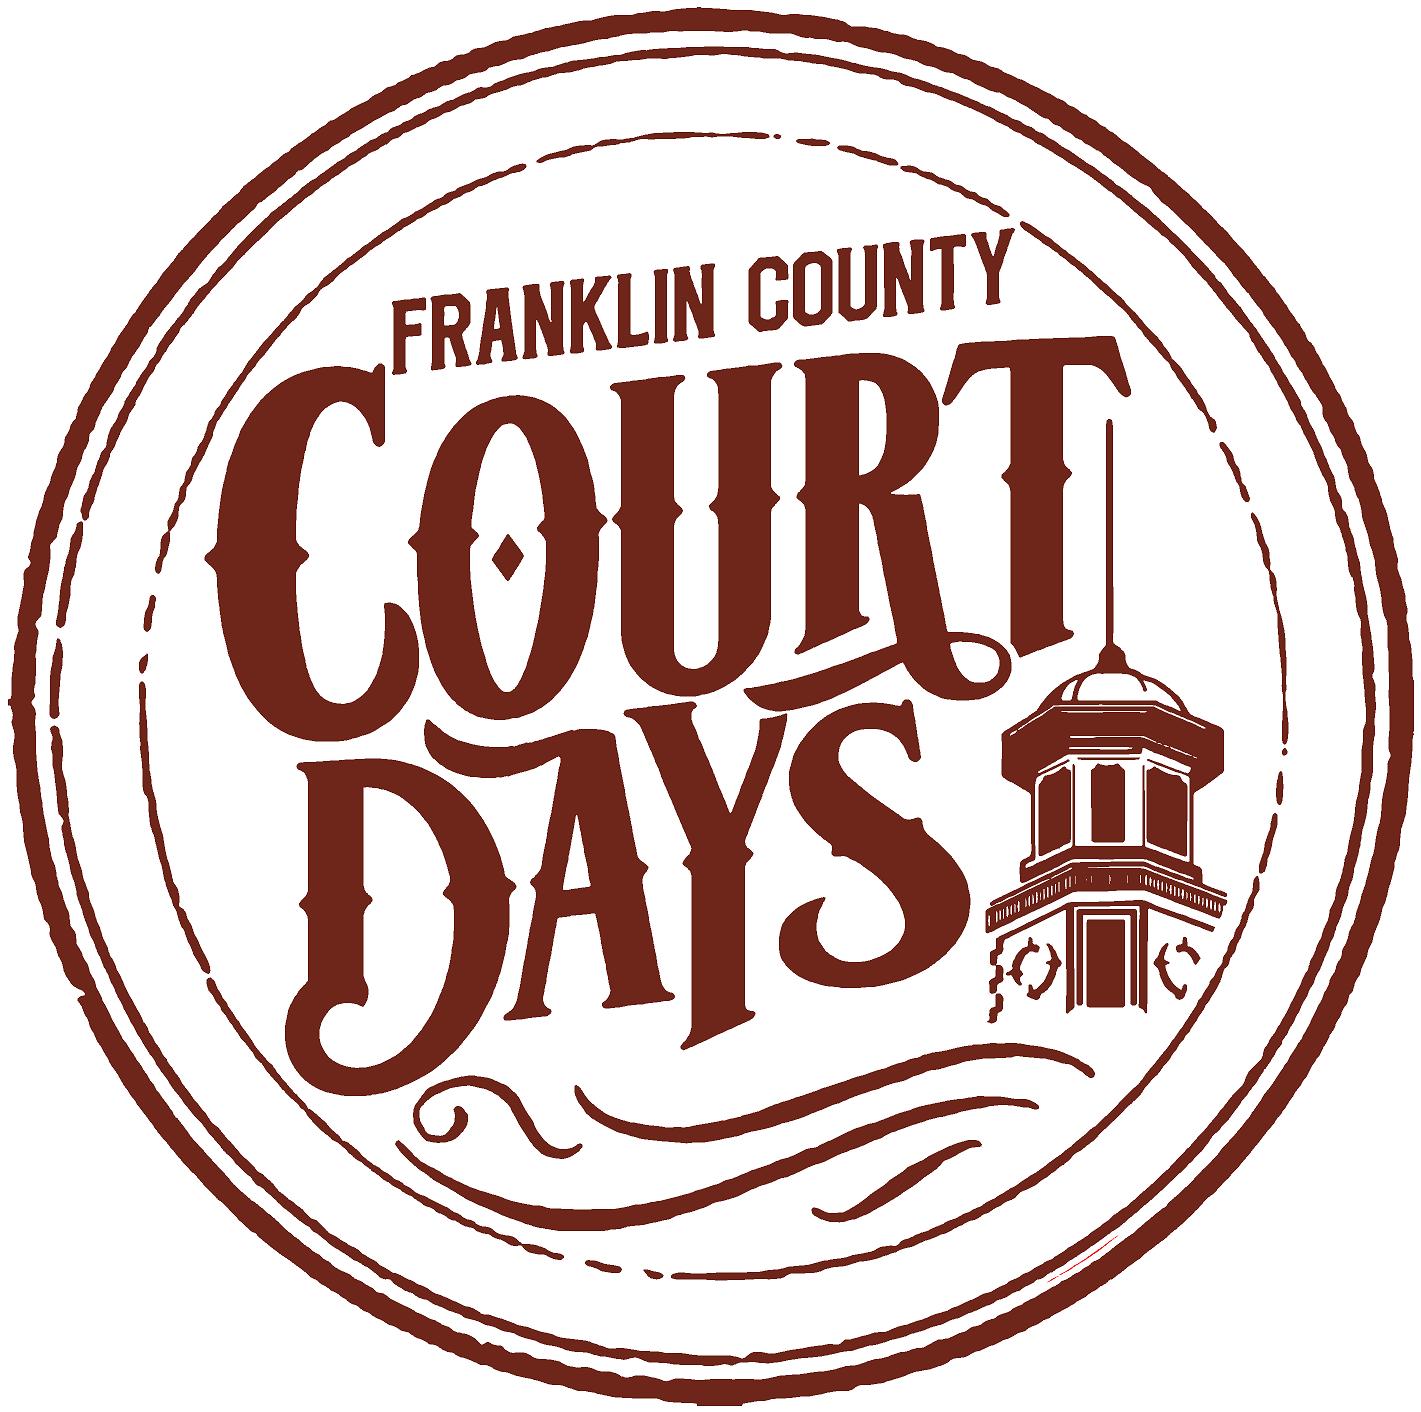 celebrate-court-days-in-franklin-county-on-saturday-june-13